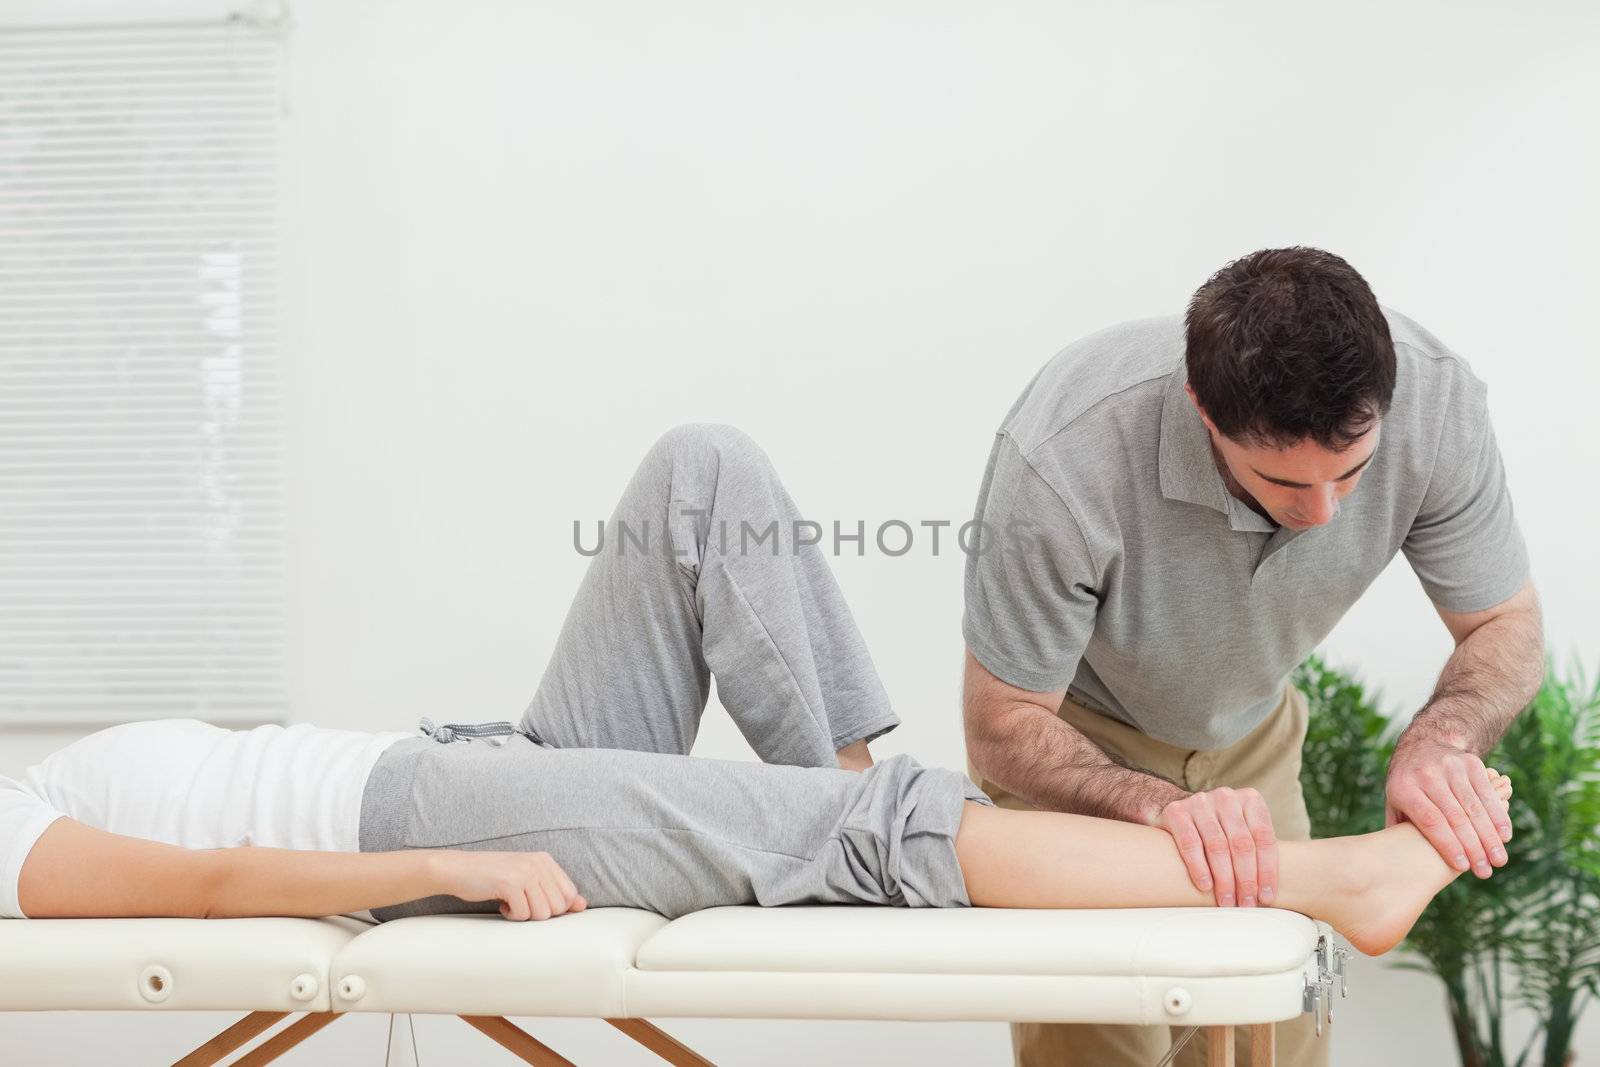 Chiropractor examining the foot of a woman by Wavebreakmedia